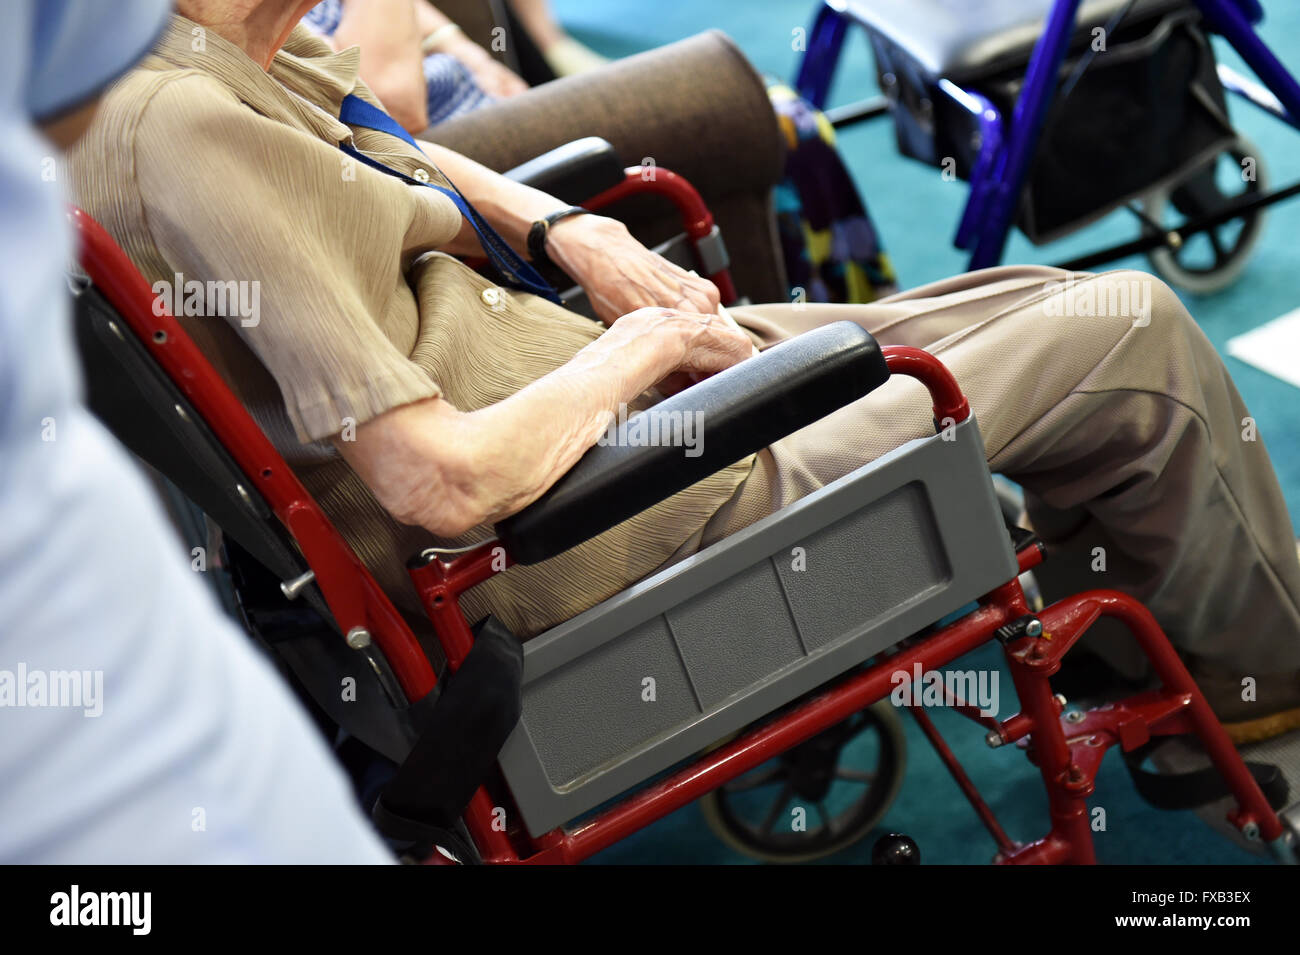 Man in a wheelchair at a Care home for the elderly UK Stock Photo